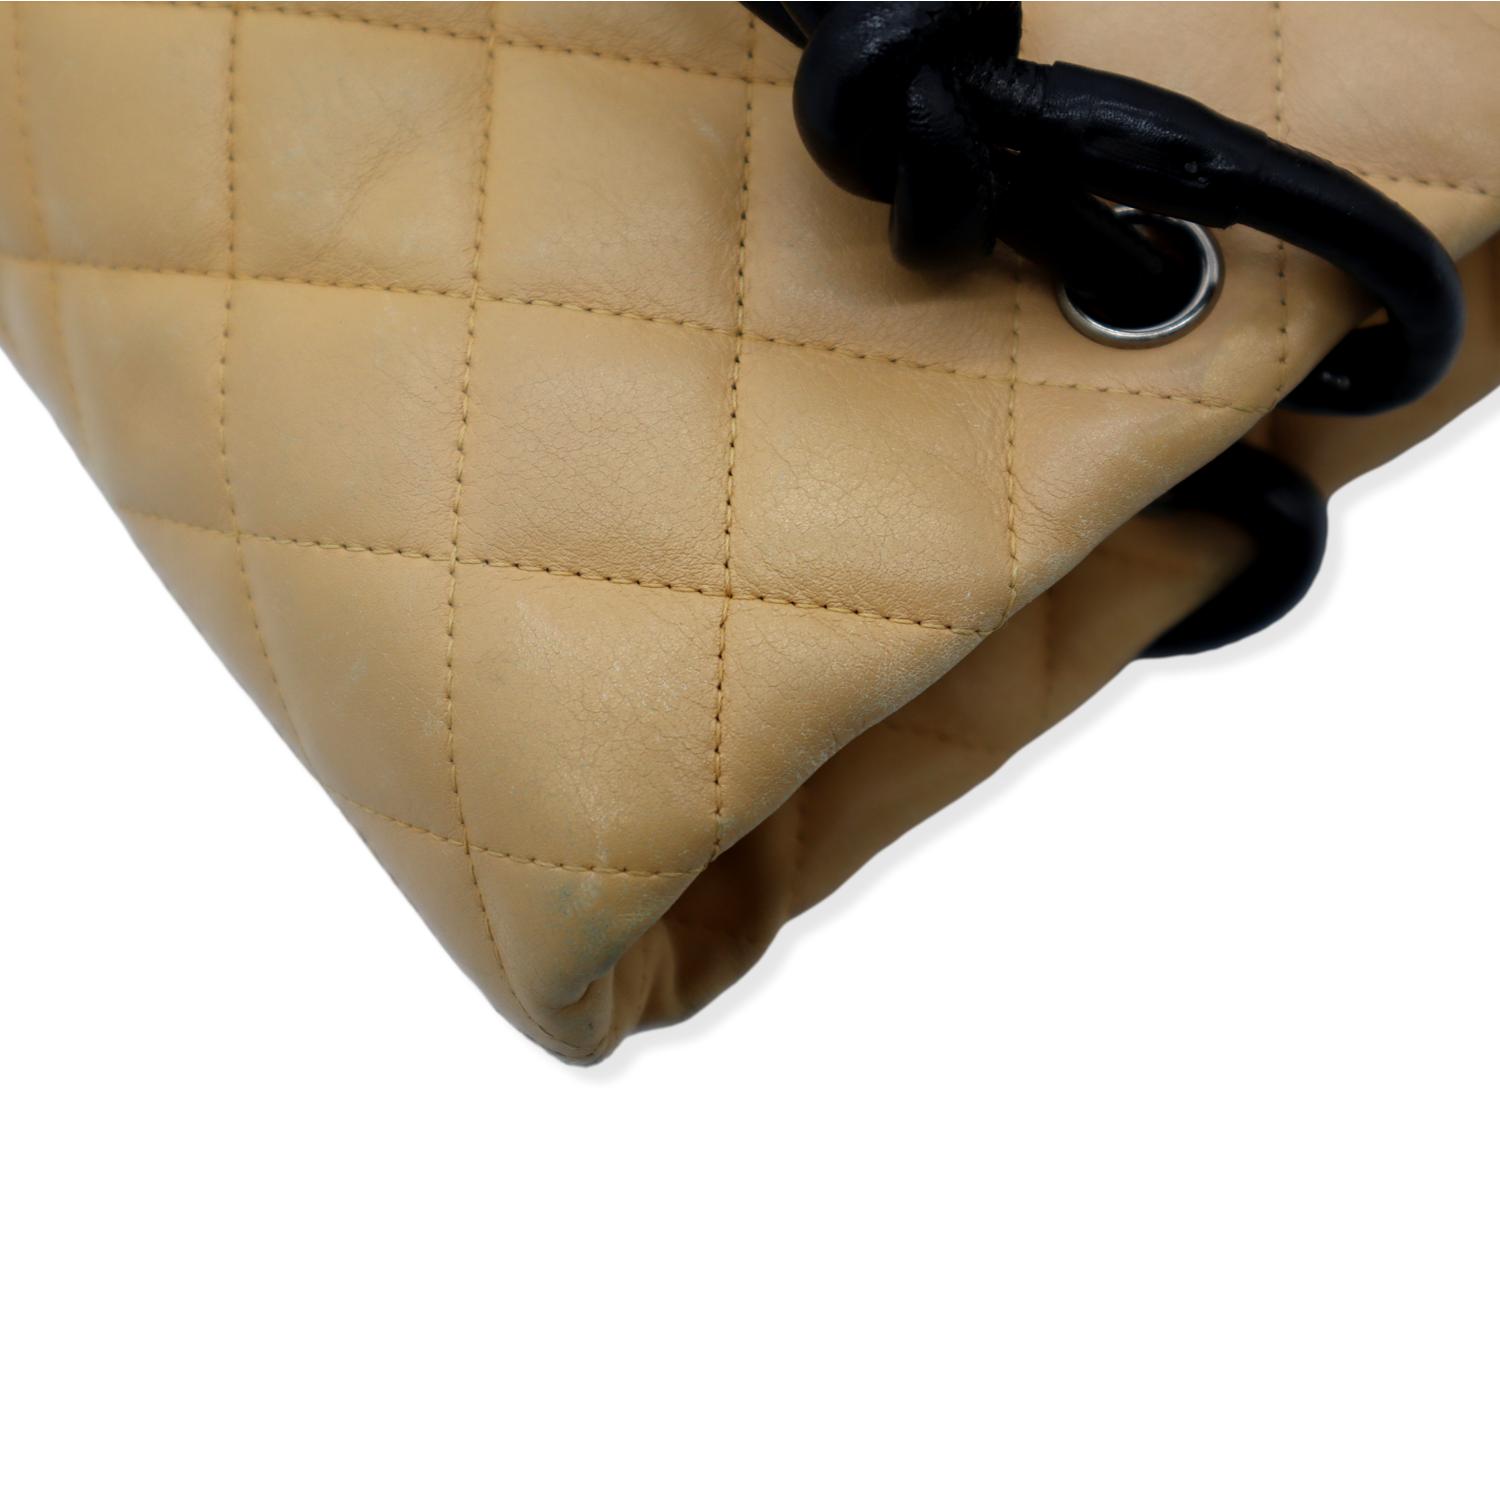 CHANEL Small Ligne Cambon Quilted Bucket Tote Beige and Black, CC